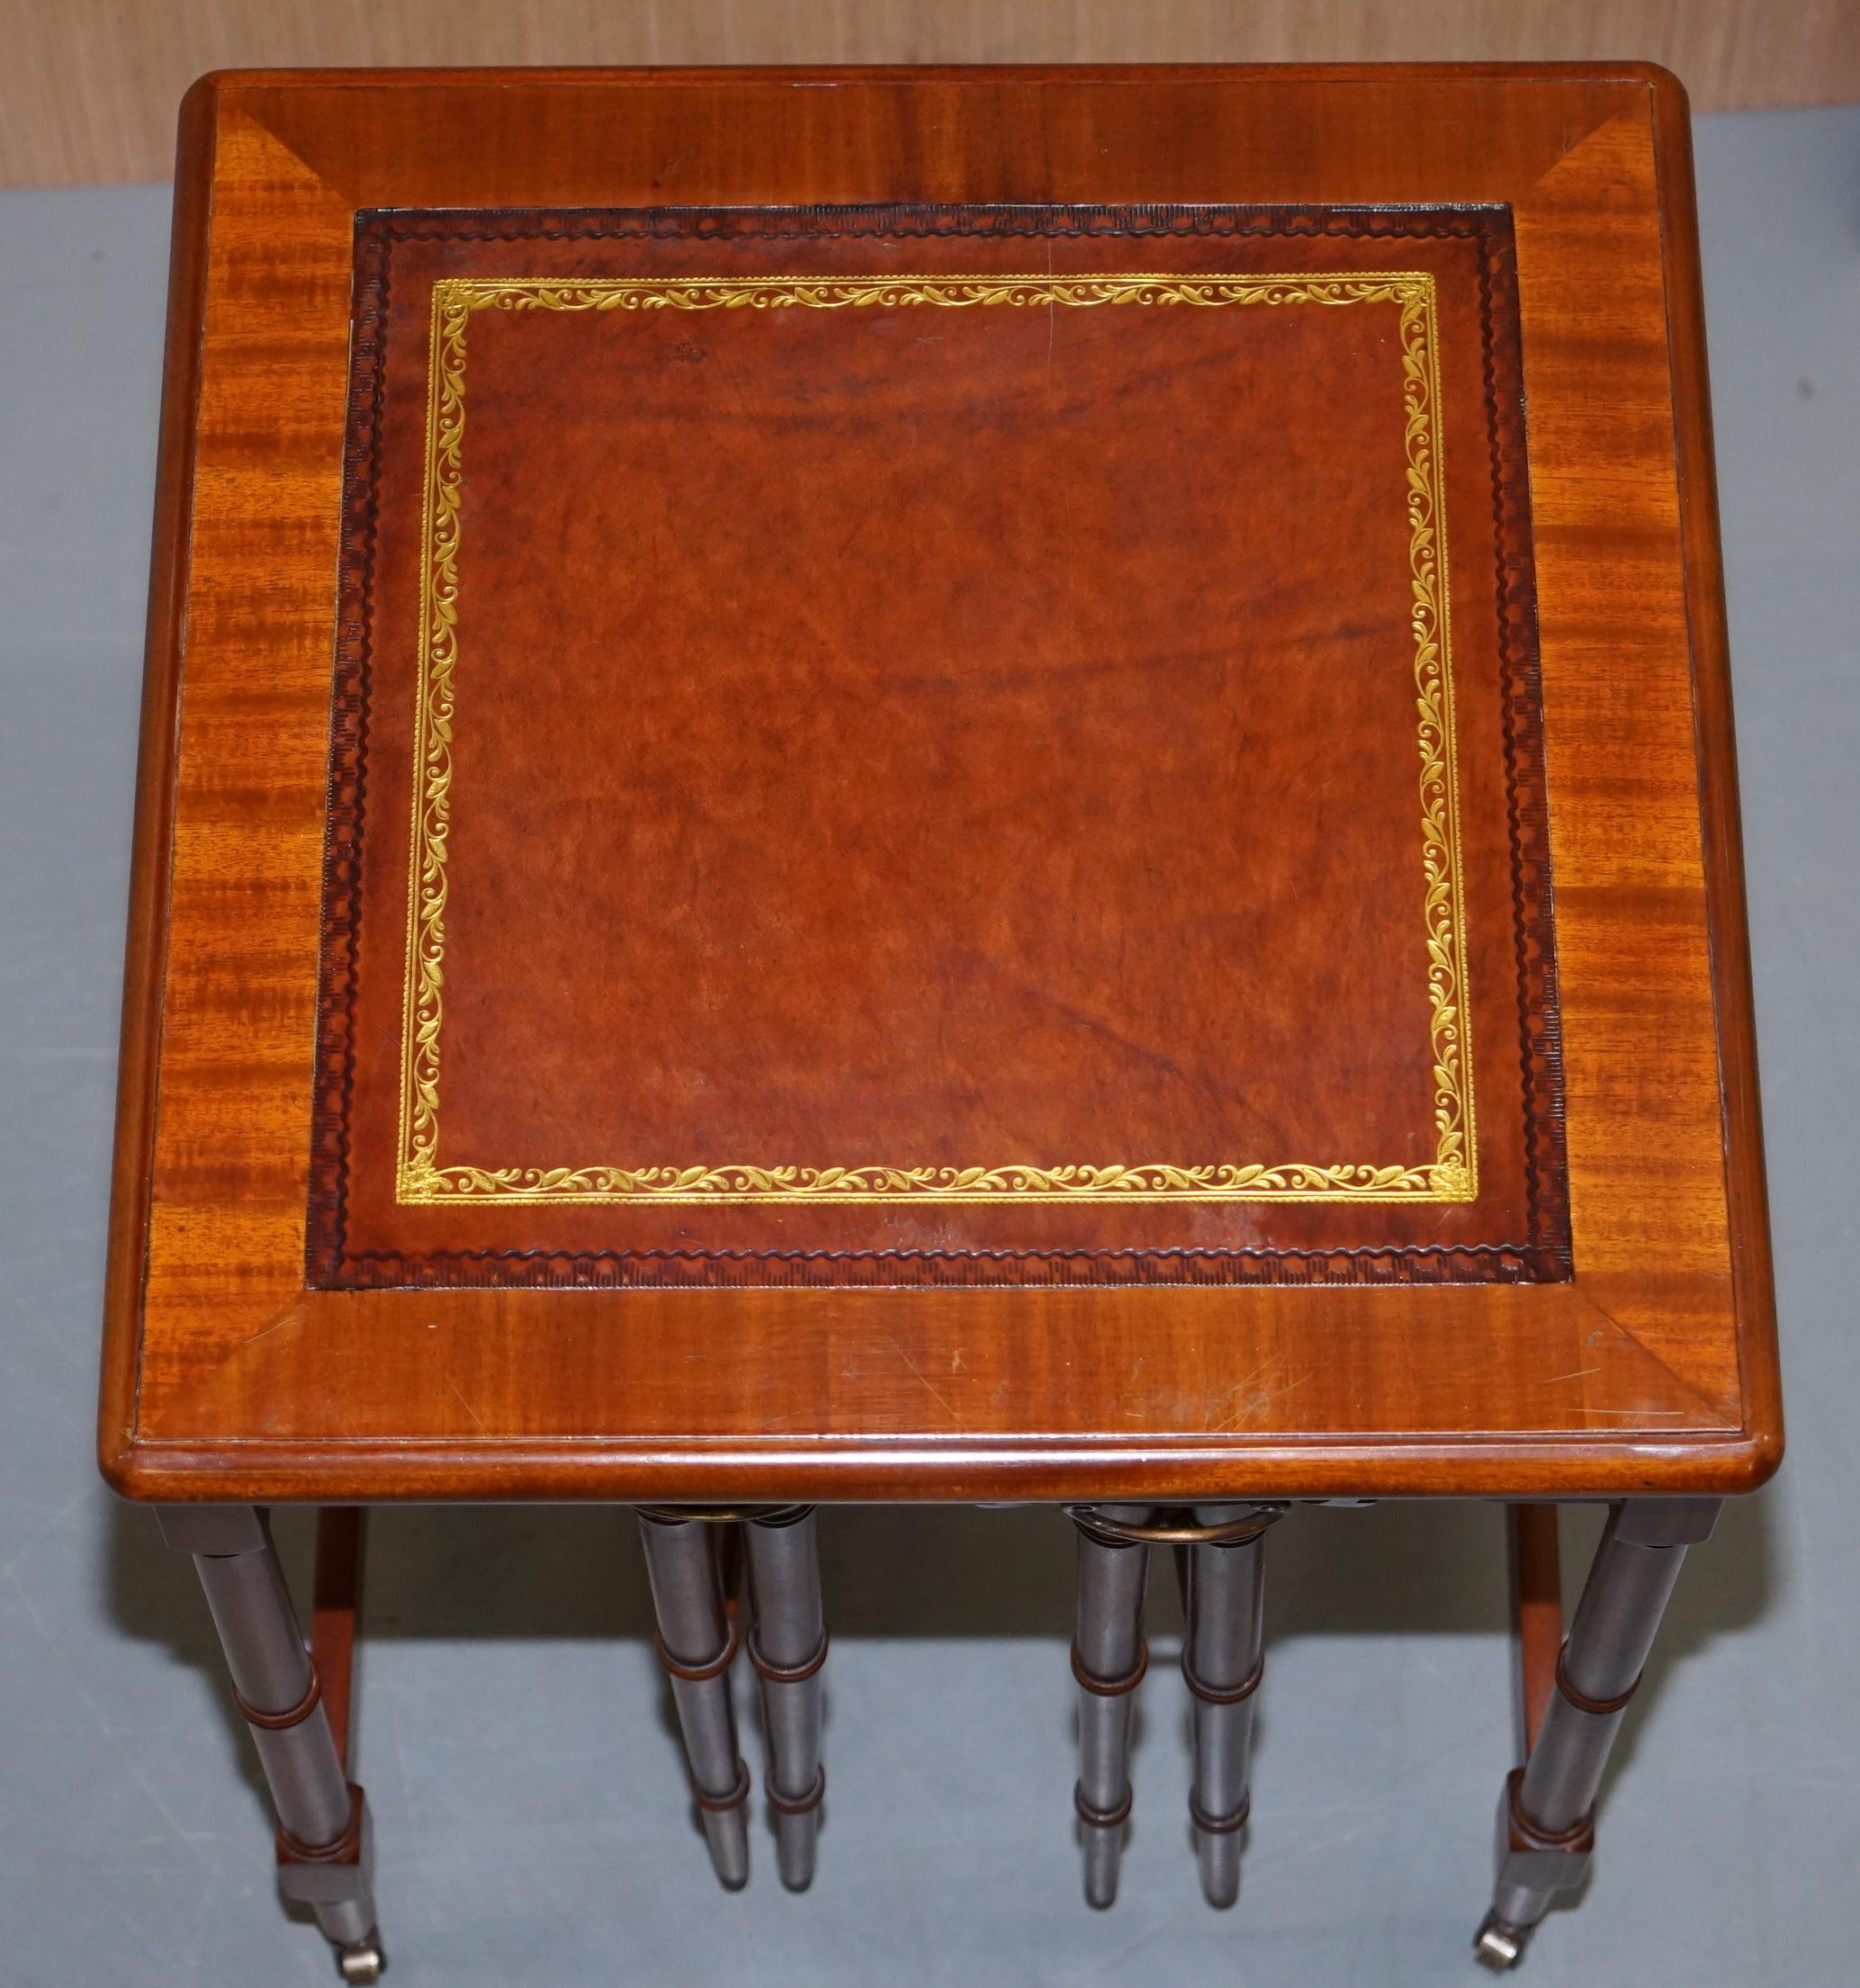 20th Century Rare Pair of Military Campaign Side Tables with Two Folded Round Tables Nested